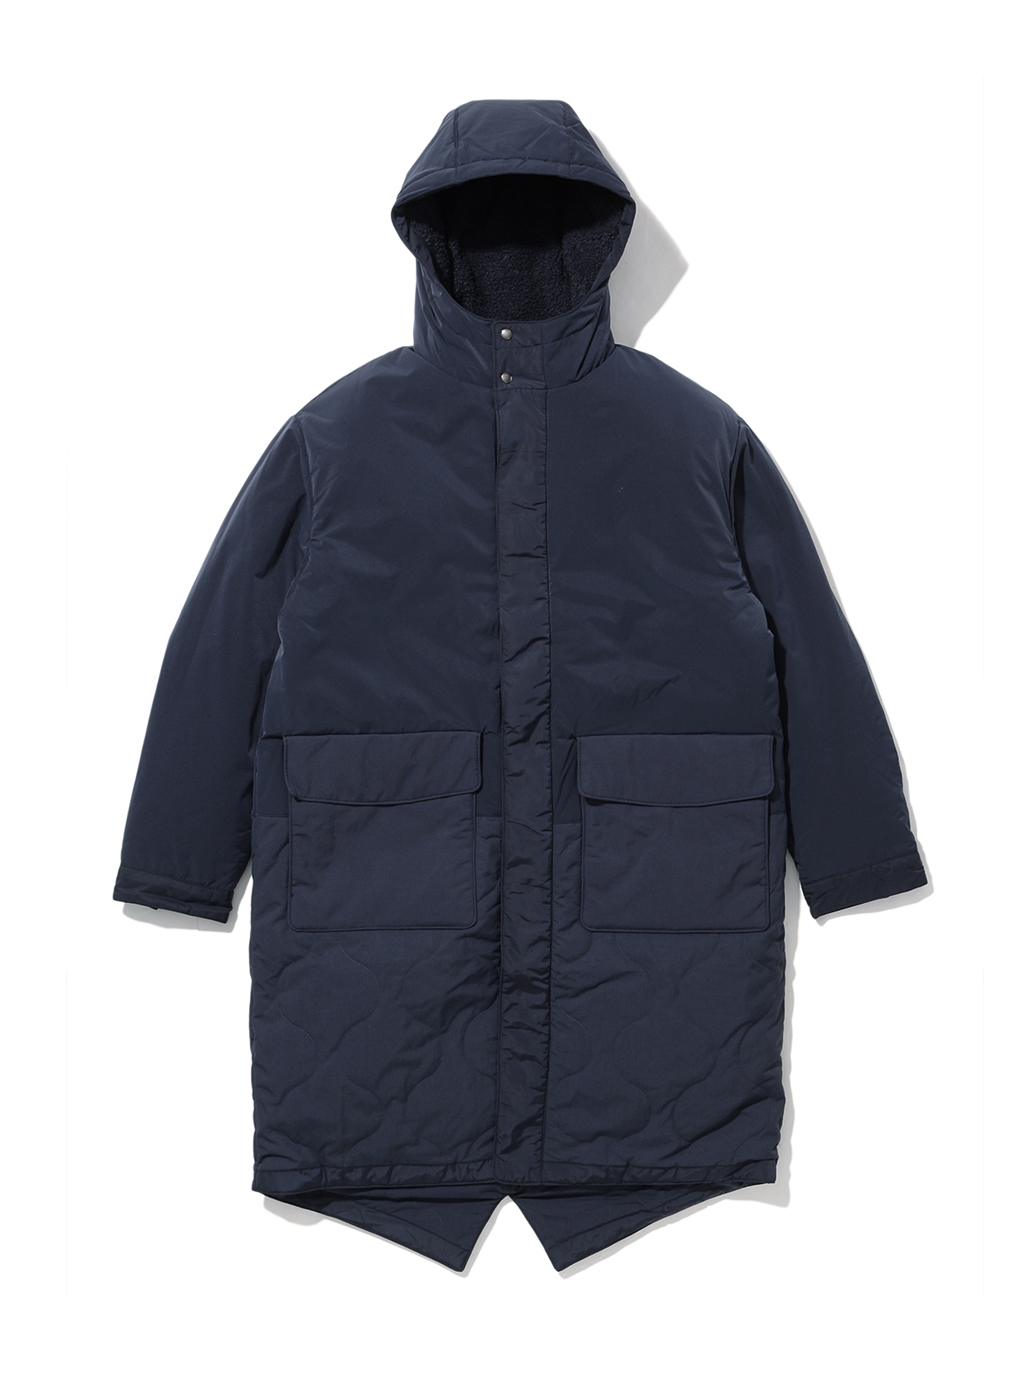 LEVI´S(R) MADE&CRAFTED(R) シェルパ LINED PARKA 1 NAVY BLAZER-